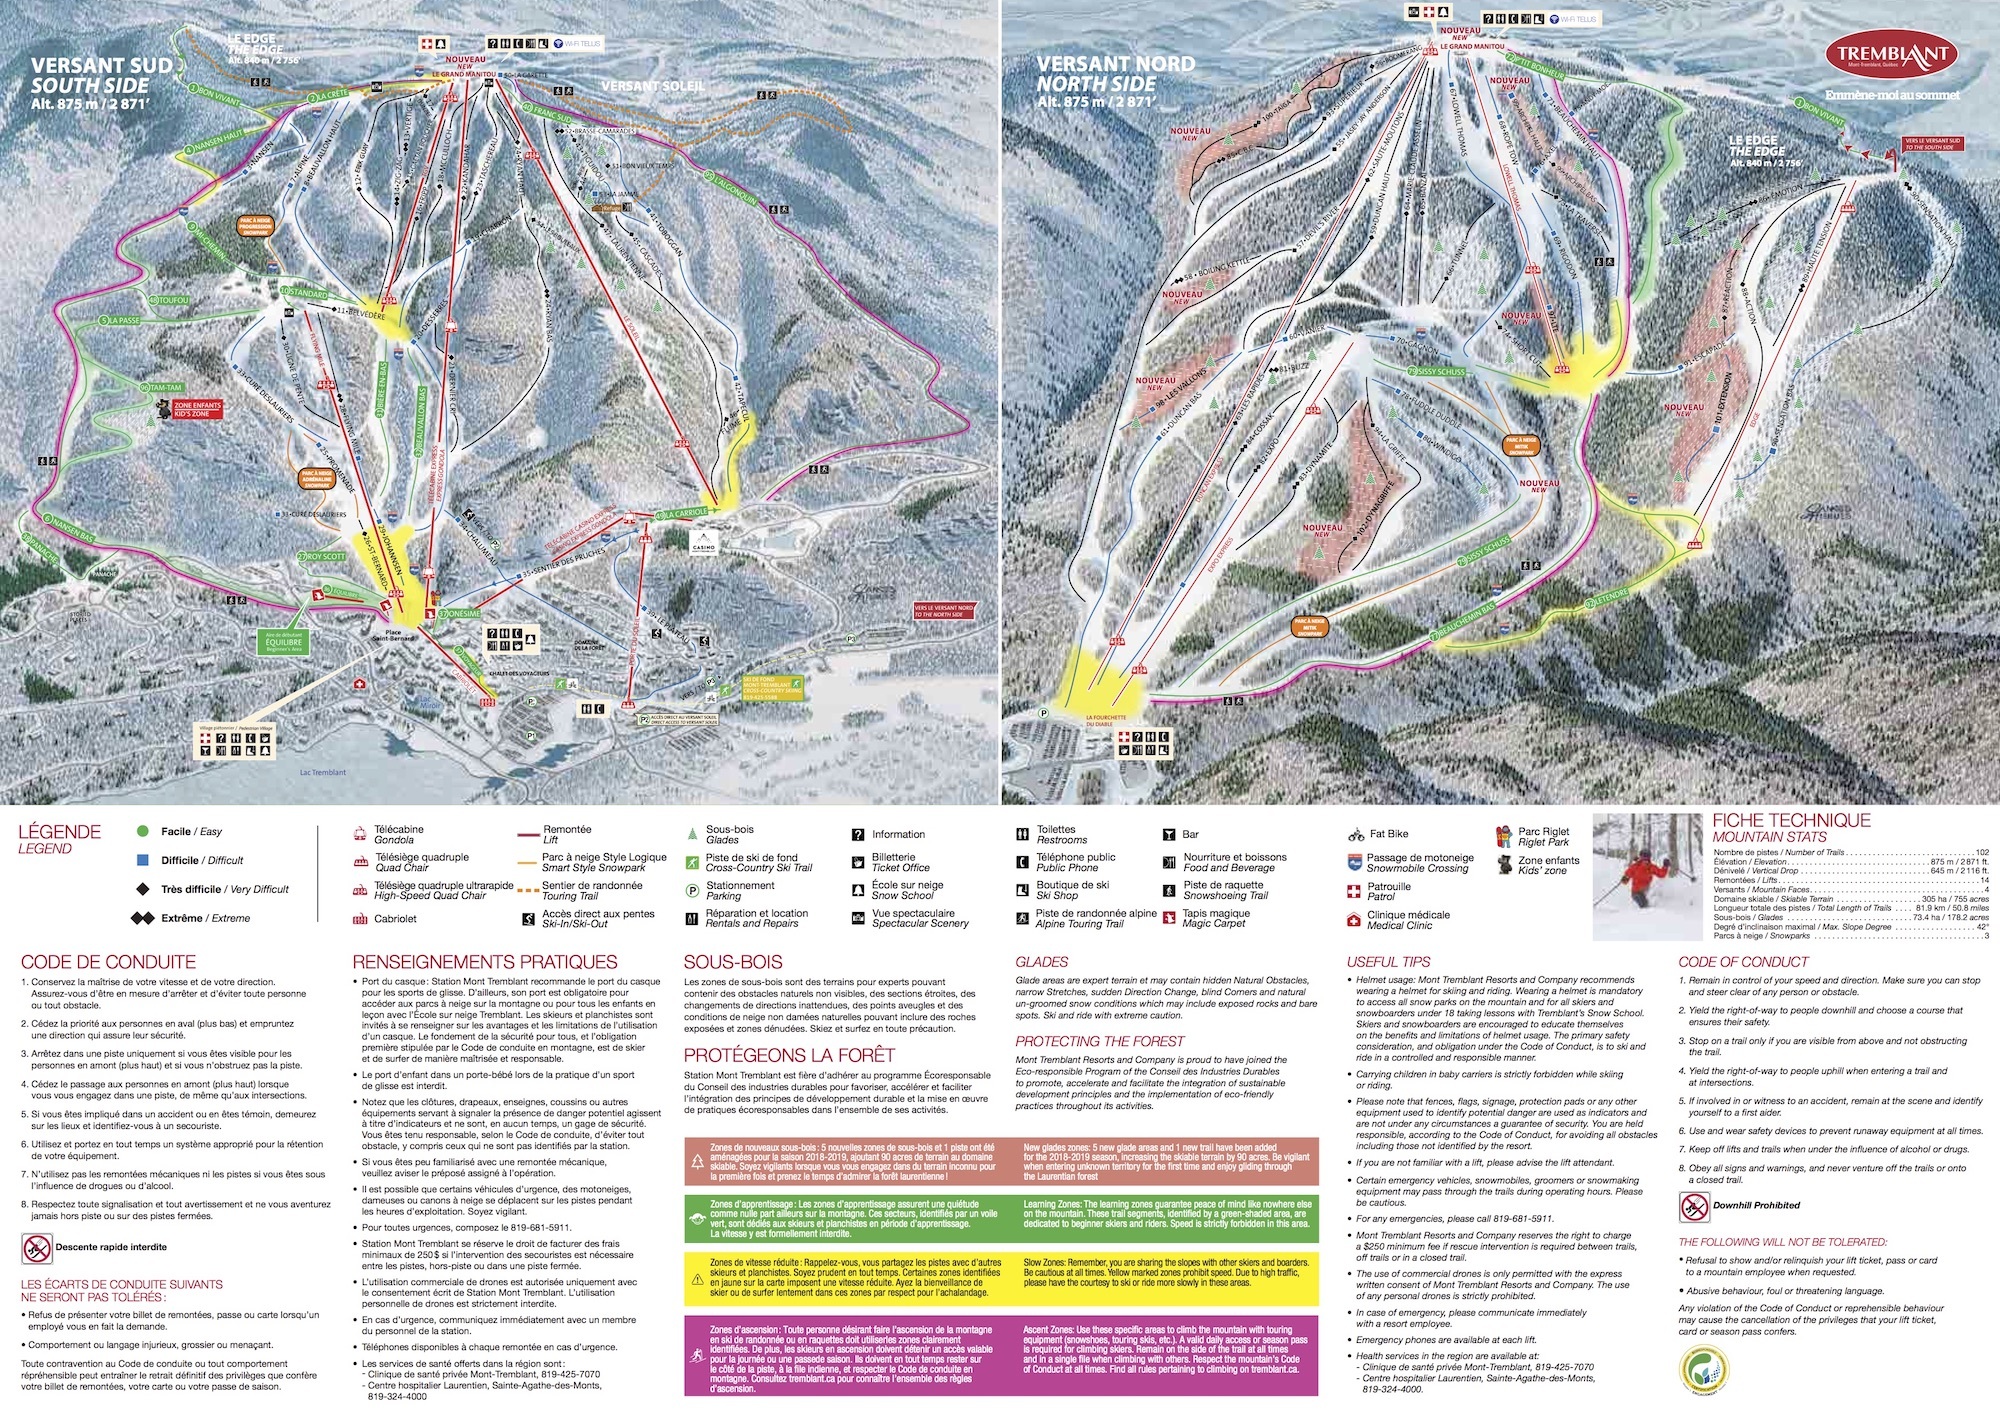 Browse the ski and snowboard runs on the Mont Tremblant piste map below.